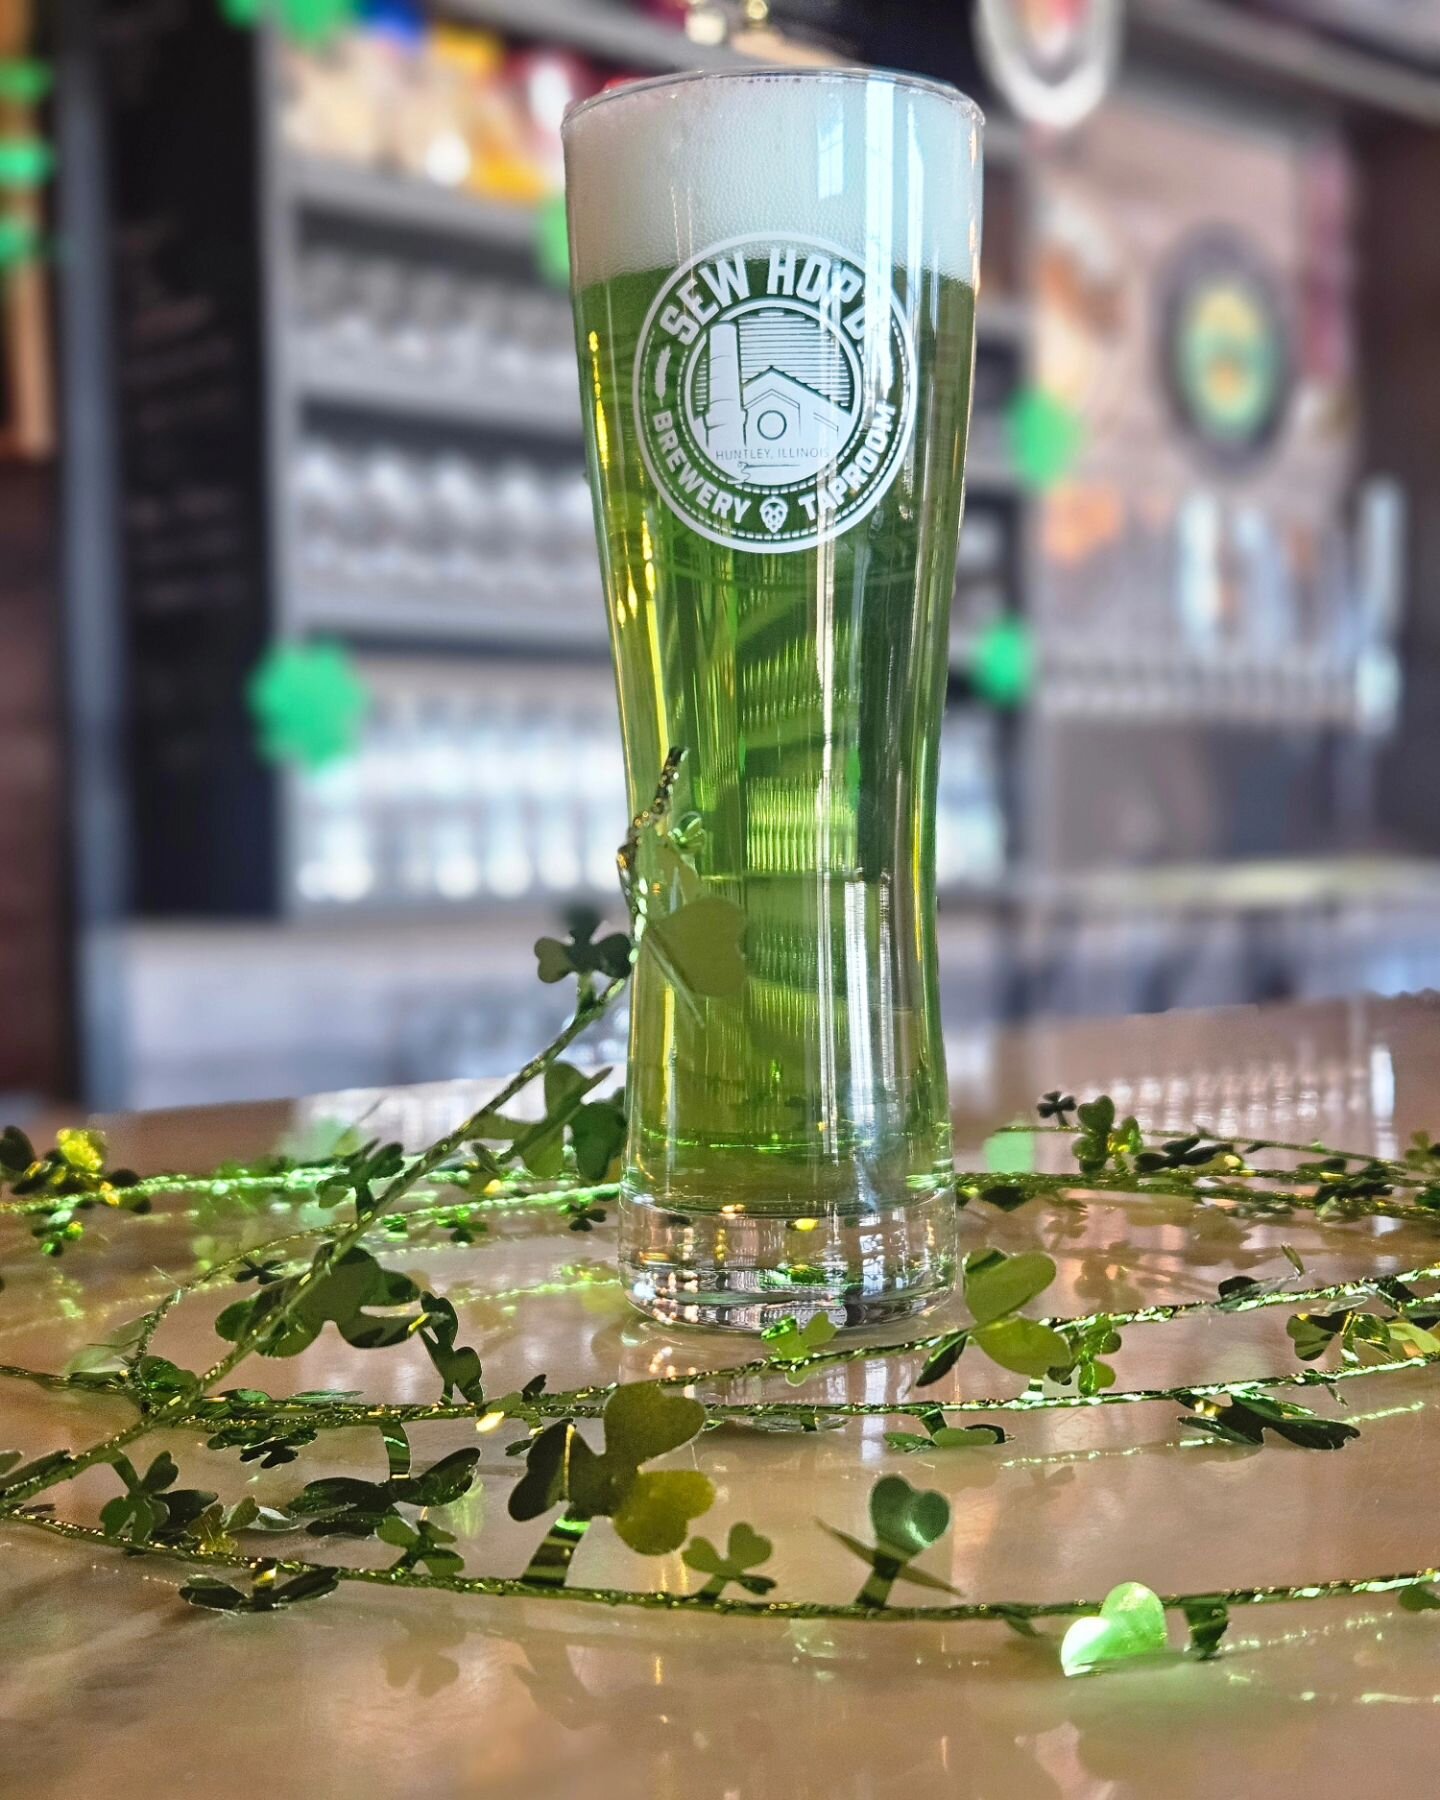 It's a beautiful day to participate in some shenanigans! We're feeling festive.🍀We'll be pouring green John Boys Pils all weekend!🍀 Our friend @uncle_cams_sandwiches is in the house with some St Patty's Day inspired menu items! Come check out what 